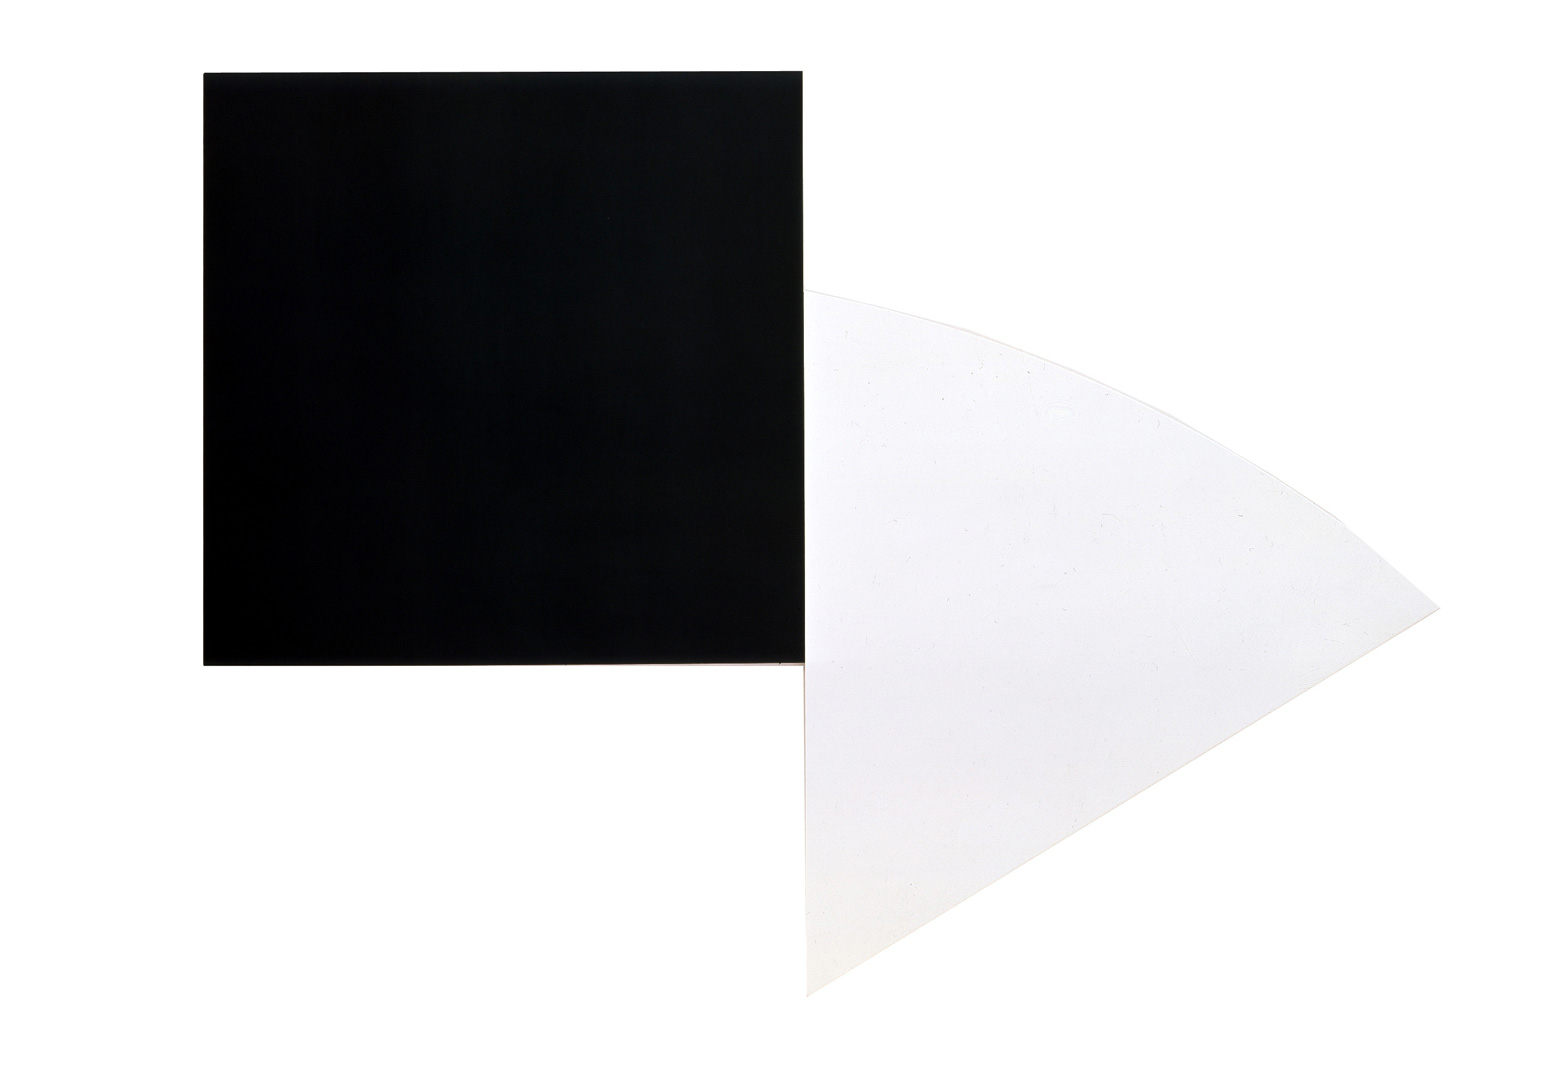 Ellsworth Kelly - Black Panel with White Curve III, 1989, oil on canvas, two joined panels